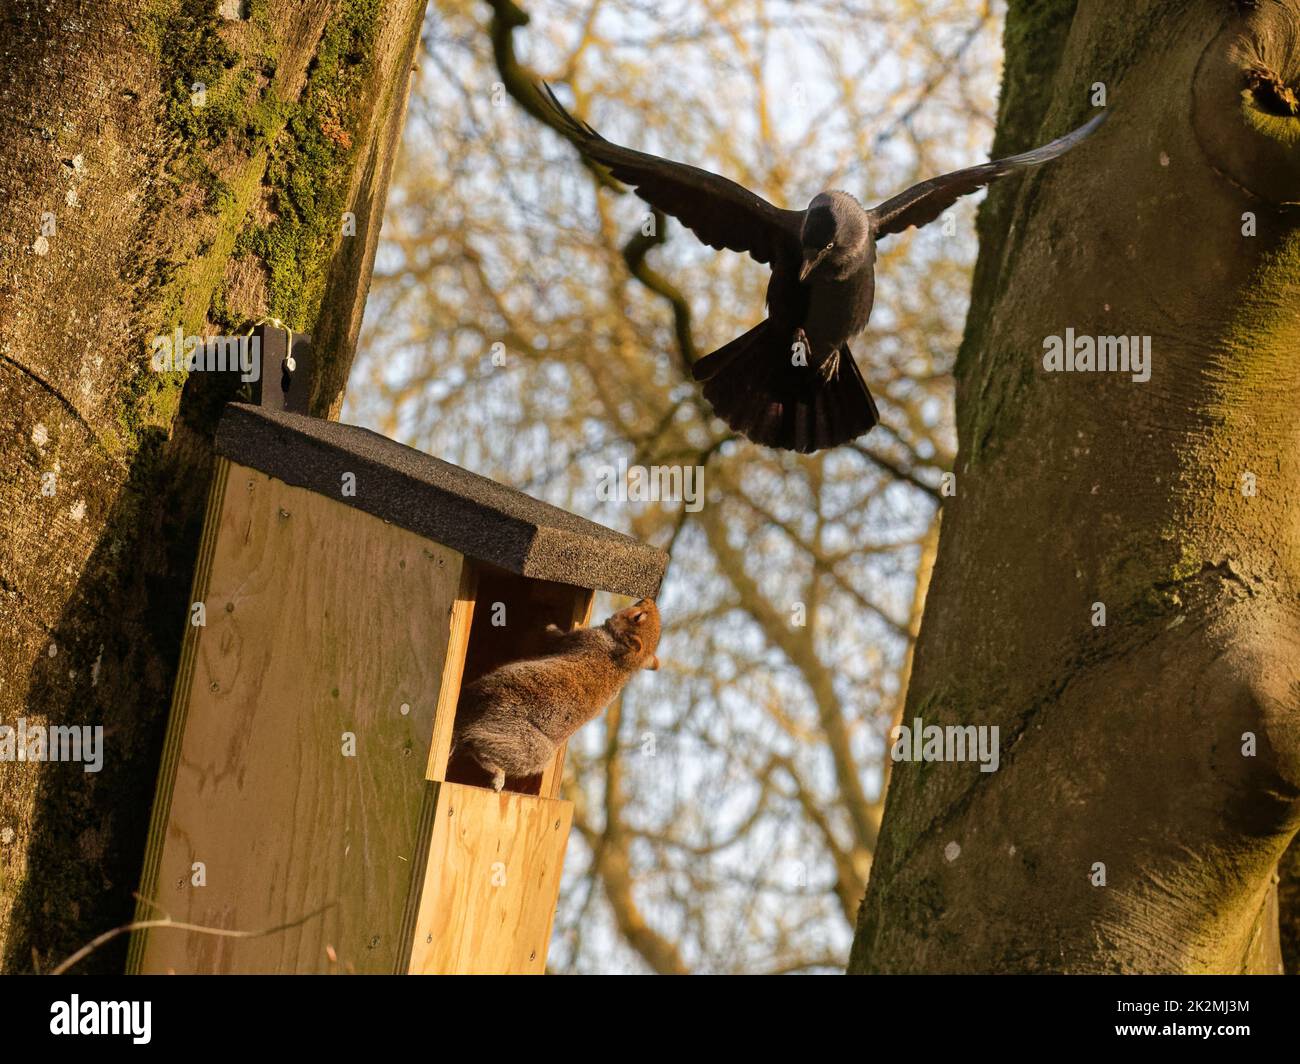 Jackdaw (Corvus monedula) hovering above a nest box it wants to nest in occupied by a Grey squirrel (Sciurus carolinensis), Wiltshire, UK, March. Stock Photo